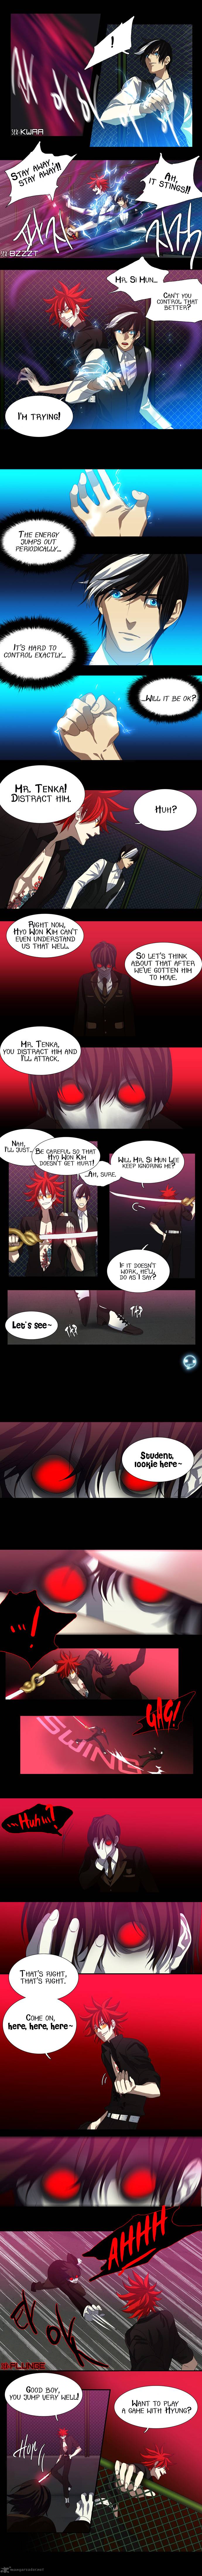 S I D Chapter 17 Page 4